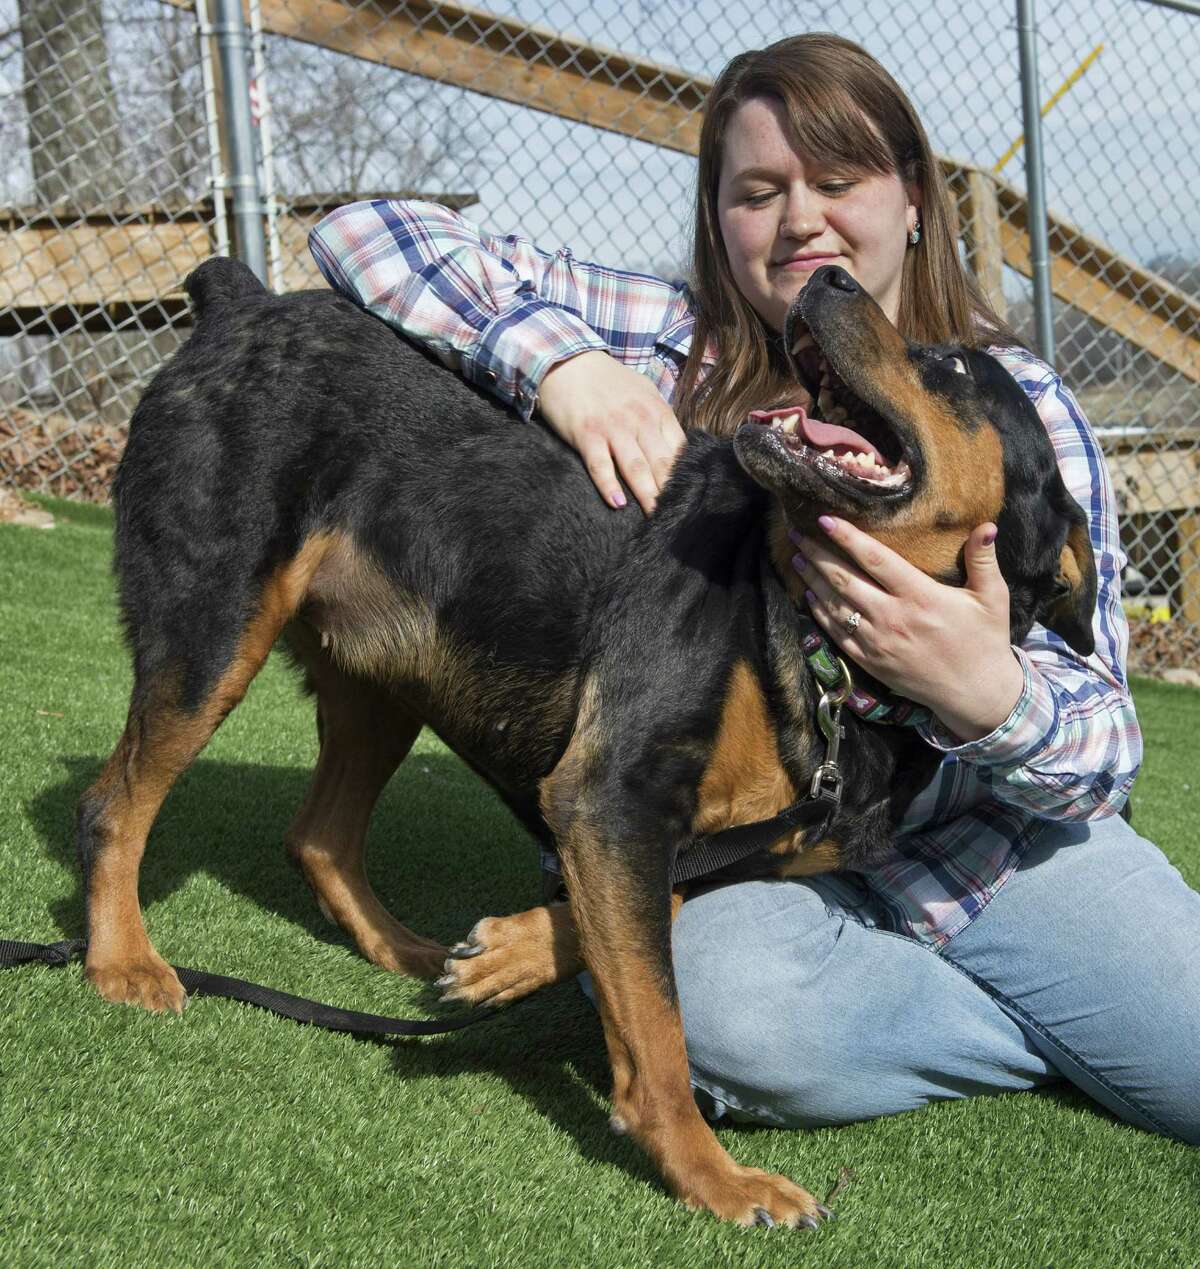 Tabitha Moore is reunited with her long lost dog, Tyra, a 7-year-old Rottweiler, at the Kansas City Pet Project in Kansas City, Mo. The dog had disappeared in 2010 from Moore’s fenced yard in Warrensburg, Mo.